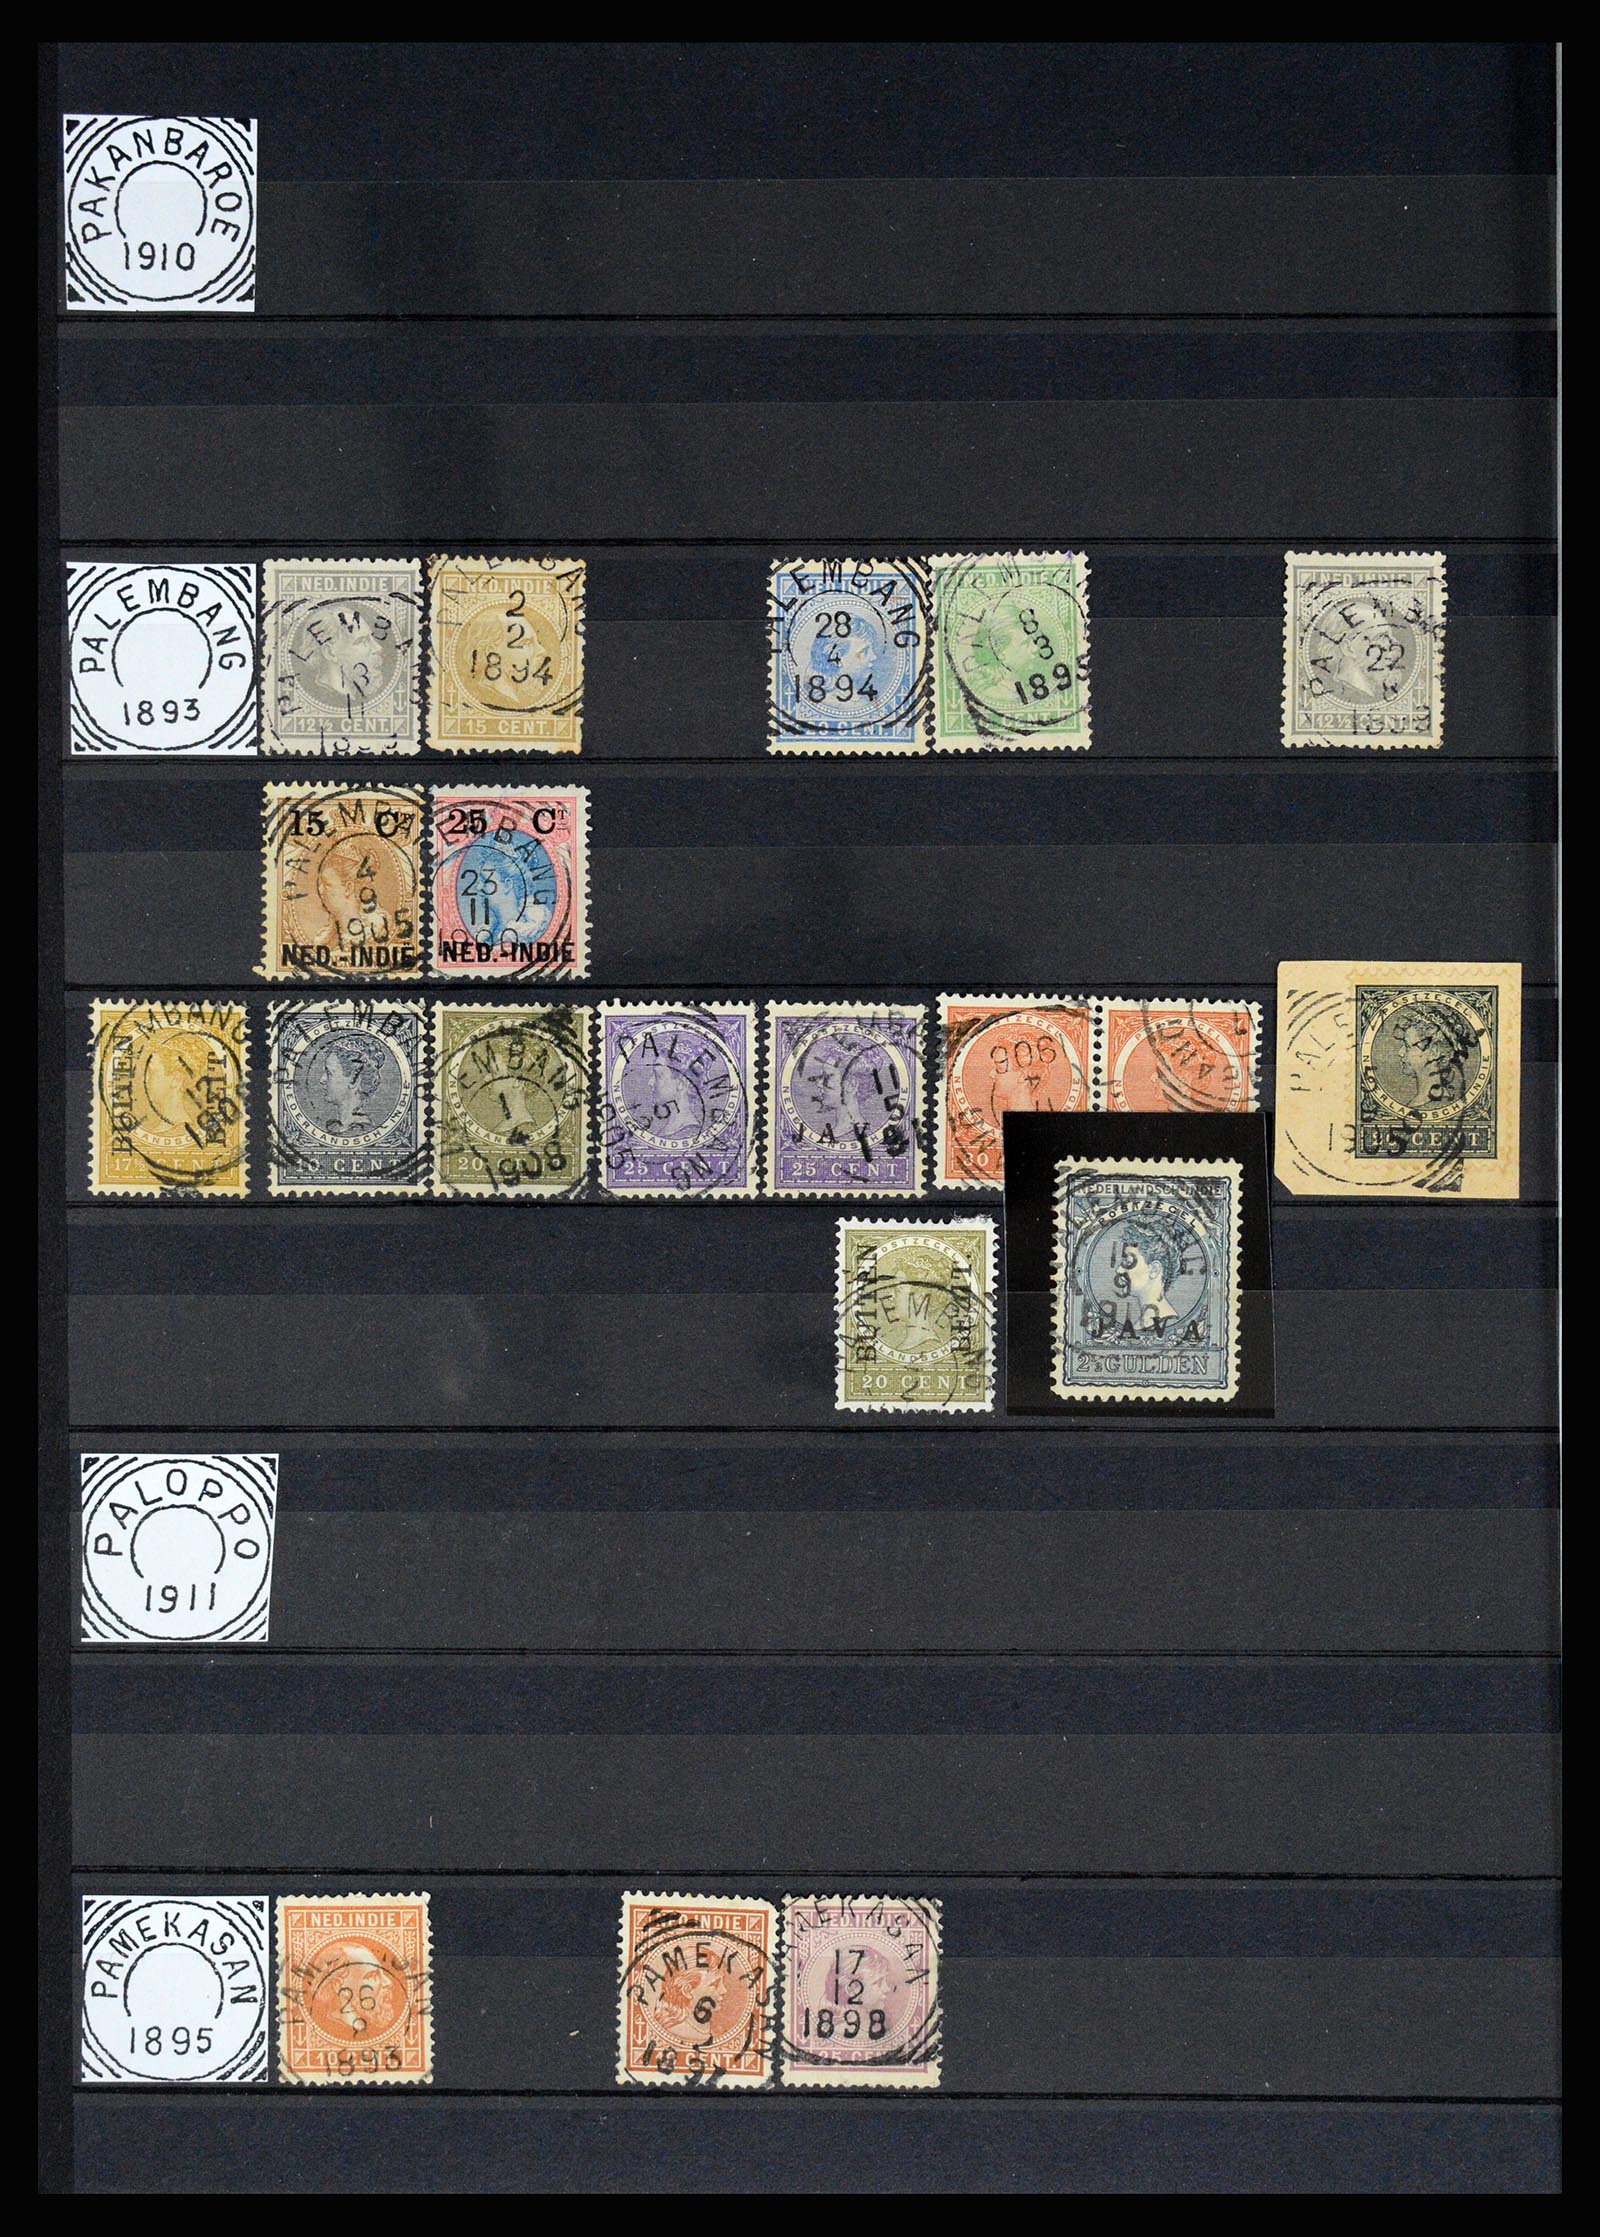 36839 035 - Stamp collection 36839 Dutch east Indies square cancels.